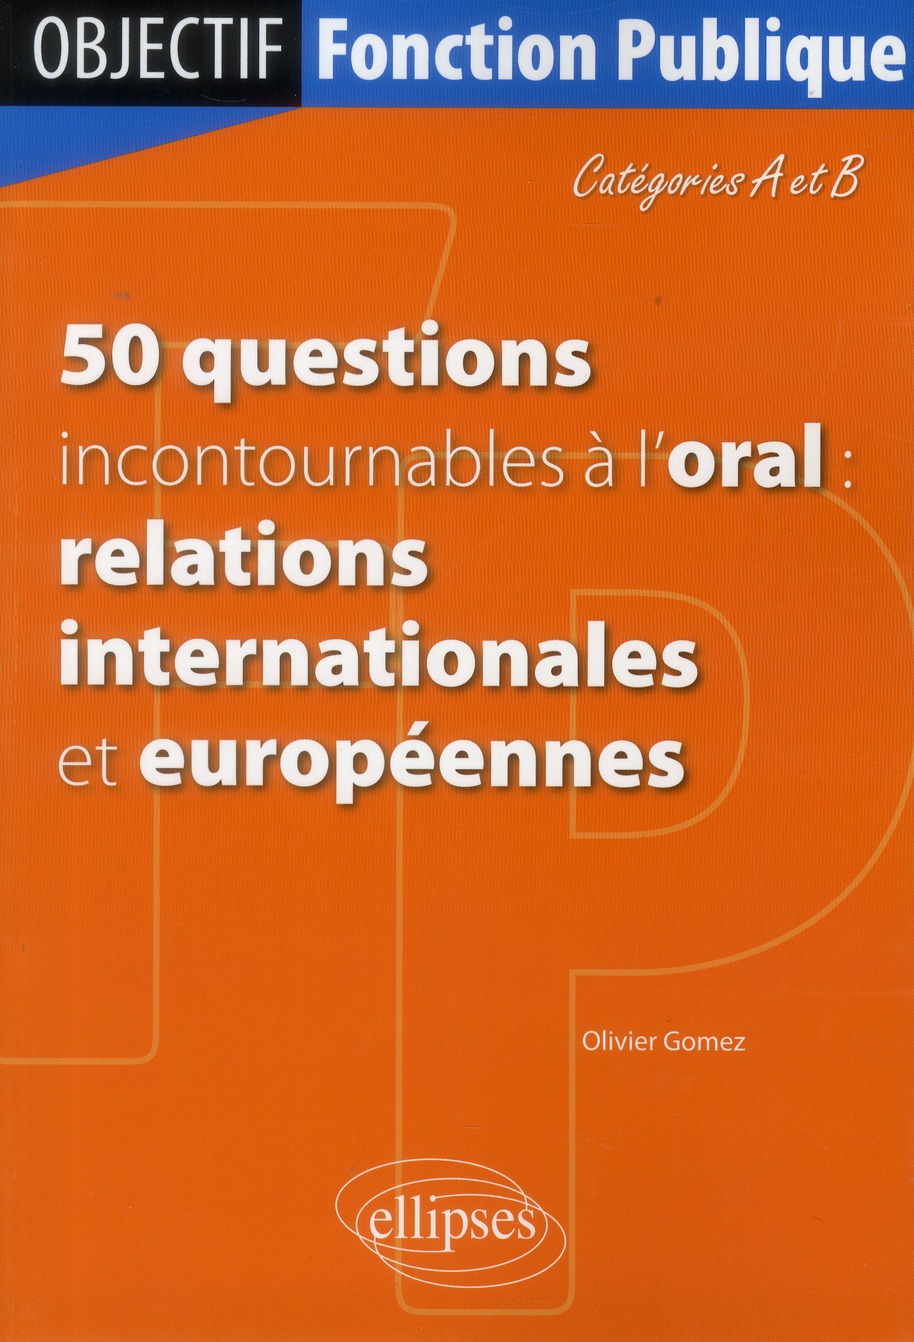 50 QUESTIONS INCONTOURNABLES A L ORAL (RELATIONS INTERNATIONALES ET EUROPEENNES) - CATEGORIE A/B